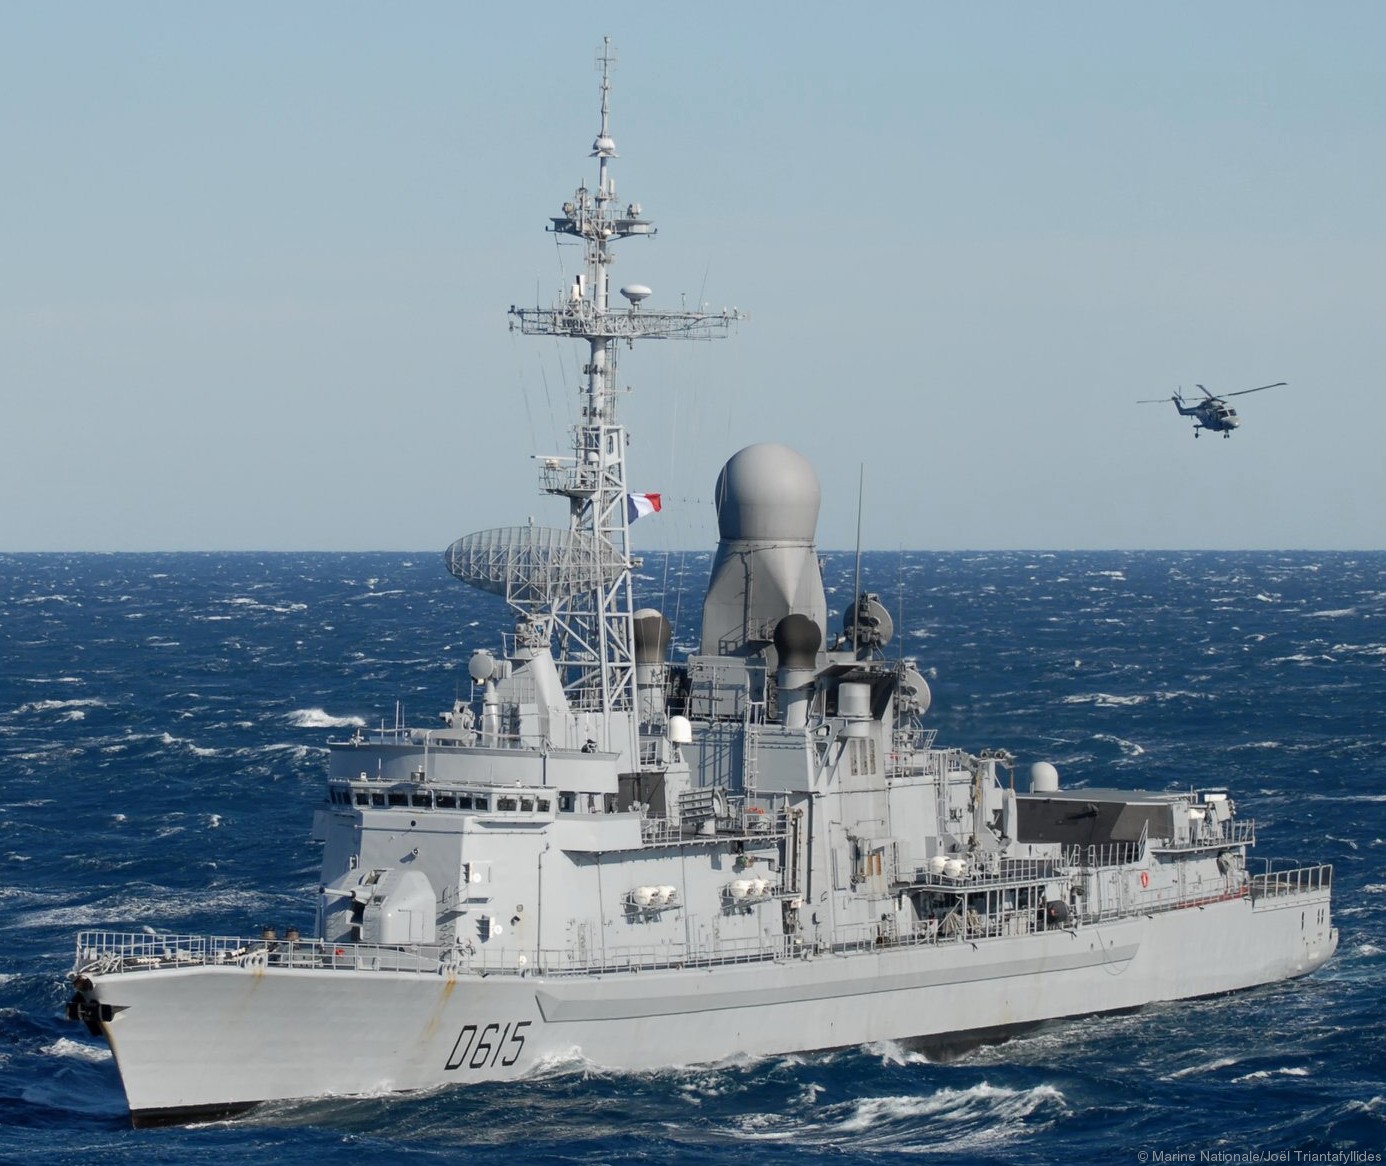 d-615 fs jean bart cassard f70aa class guided missile frigate ffgh ddg french navy marine nationale 31